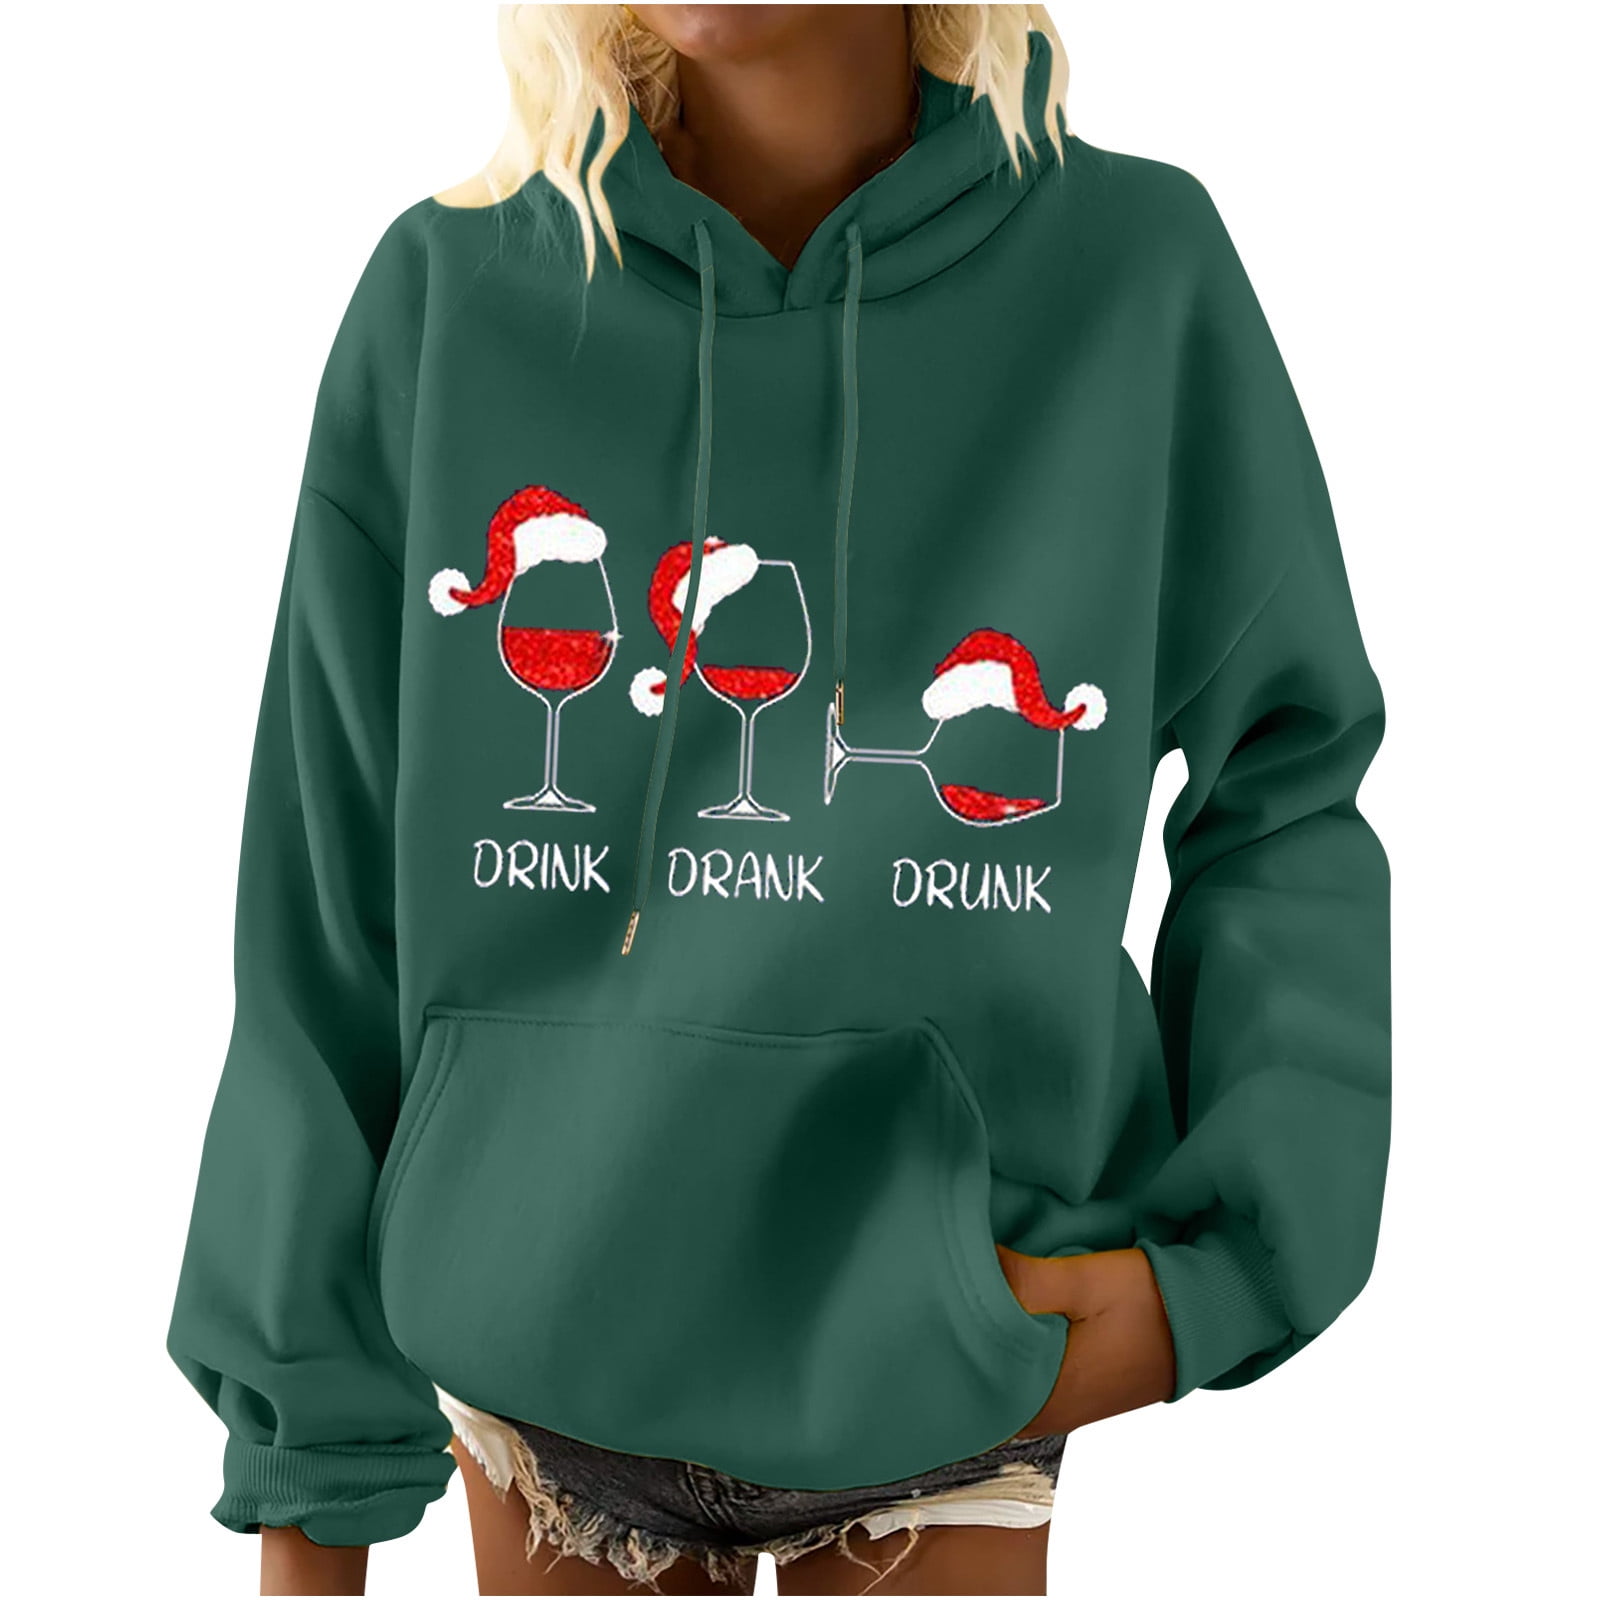 Miekld Womens Christmas Graphic Sweatshirts,1 dollar items only,overstock  clearance,shopping online website,2 dollar stuff,sweatshirt  clearance,free+stuff,womens clothes sale prime today clearance, at   Women's Clothing store